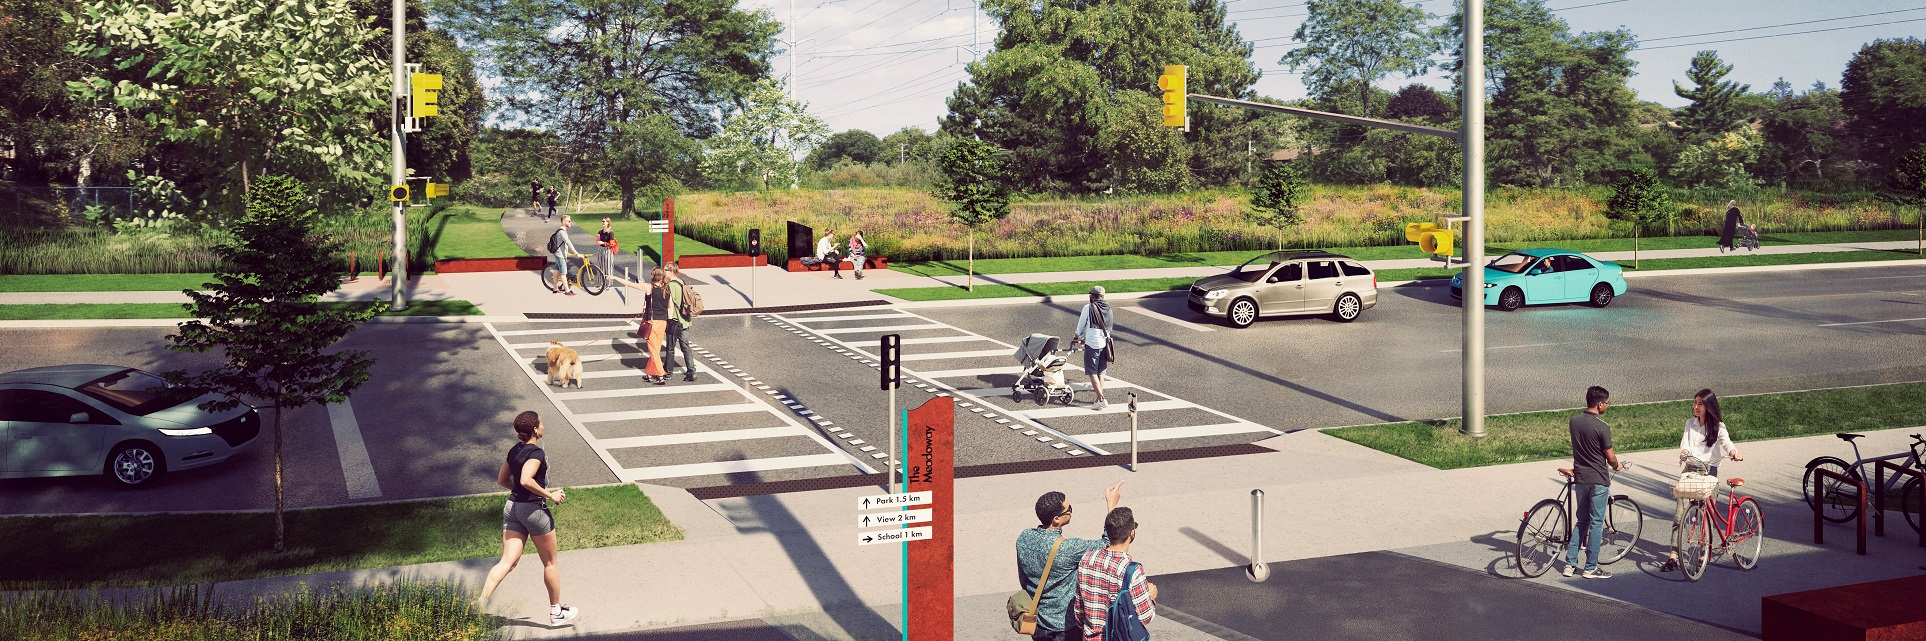 architectural rendering of a typical Meadoway road crossing